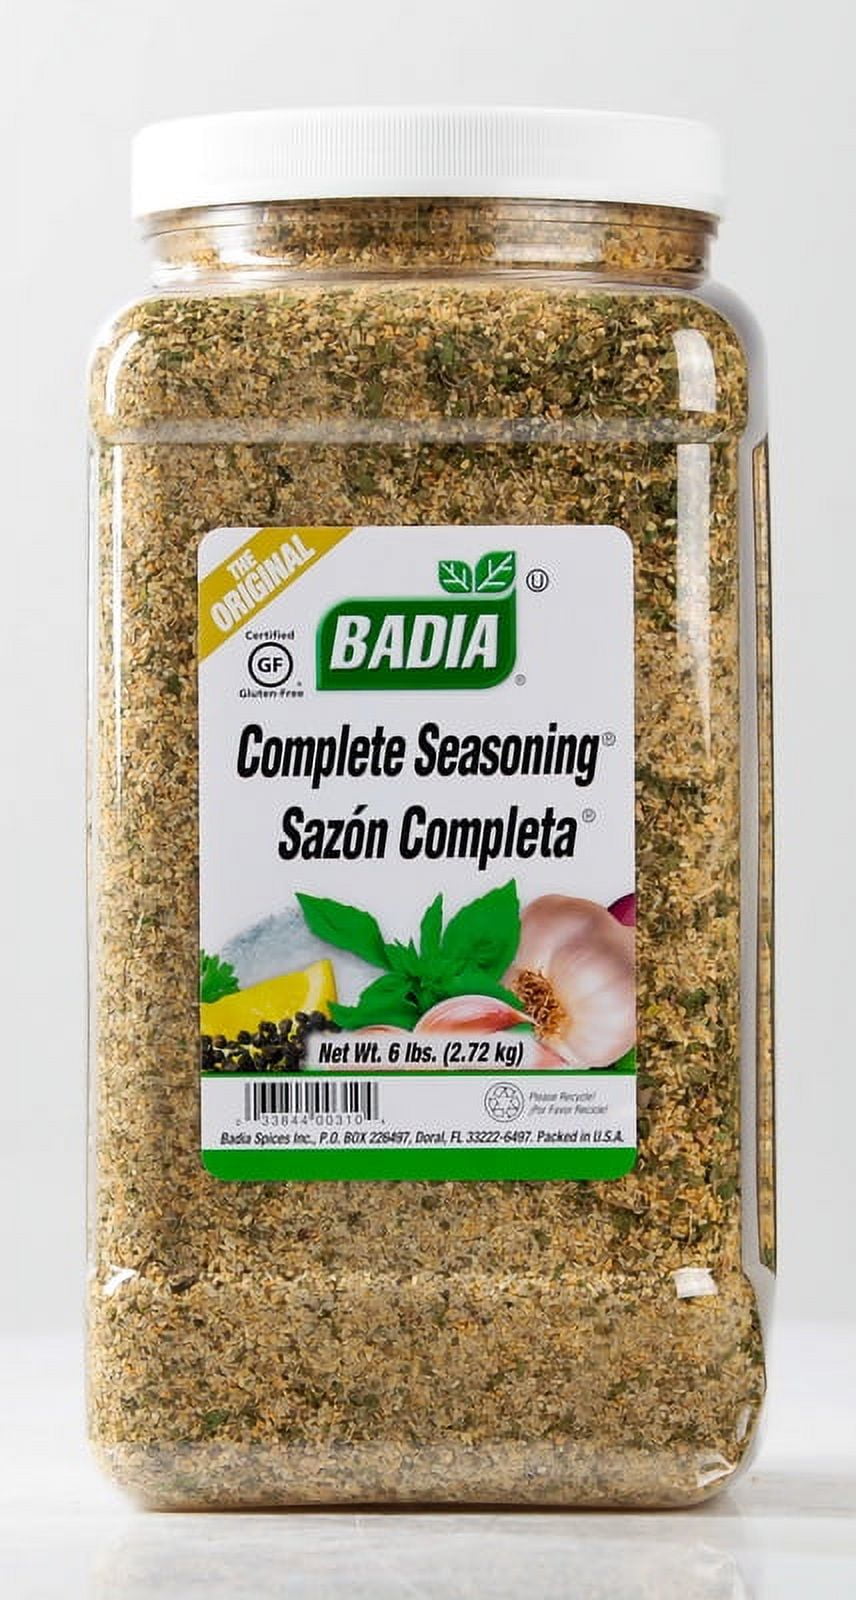 Badia the Original Complete Seasoning, Delivery Near You